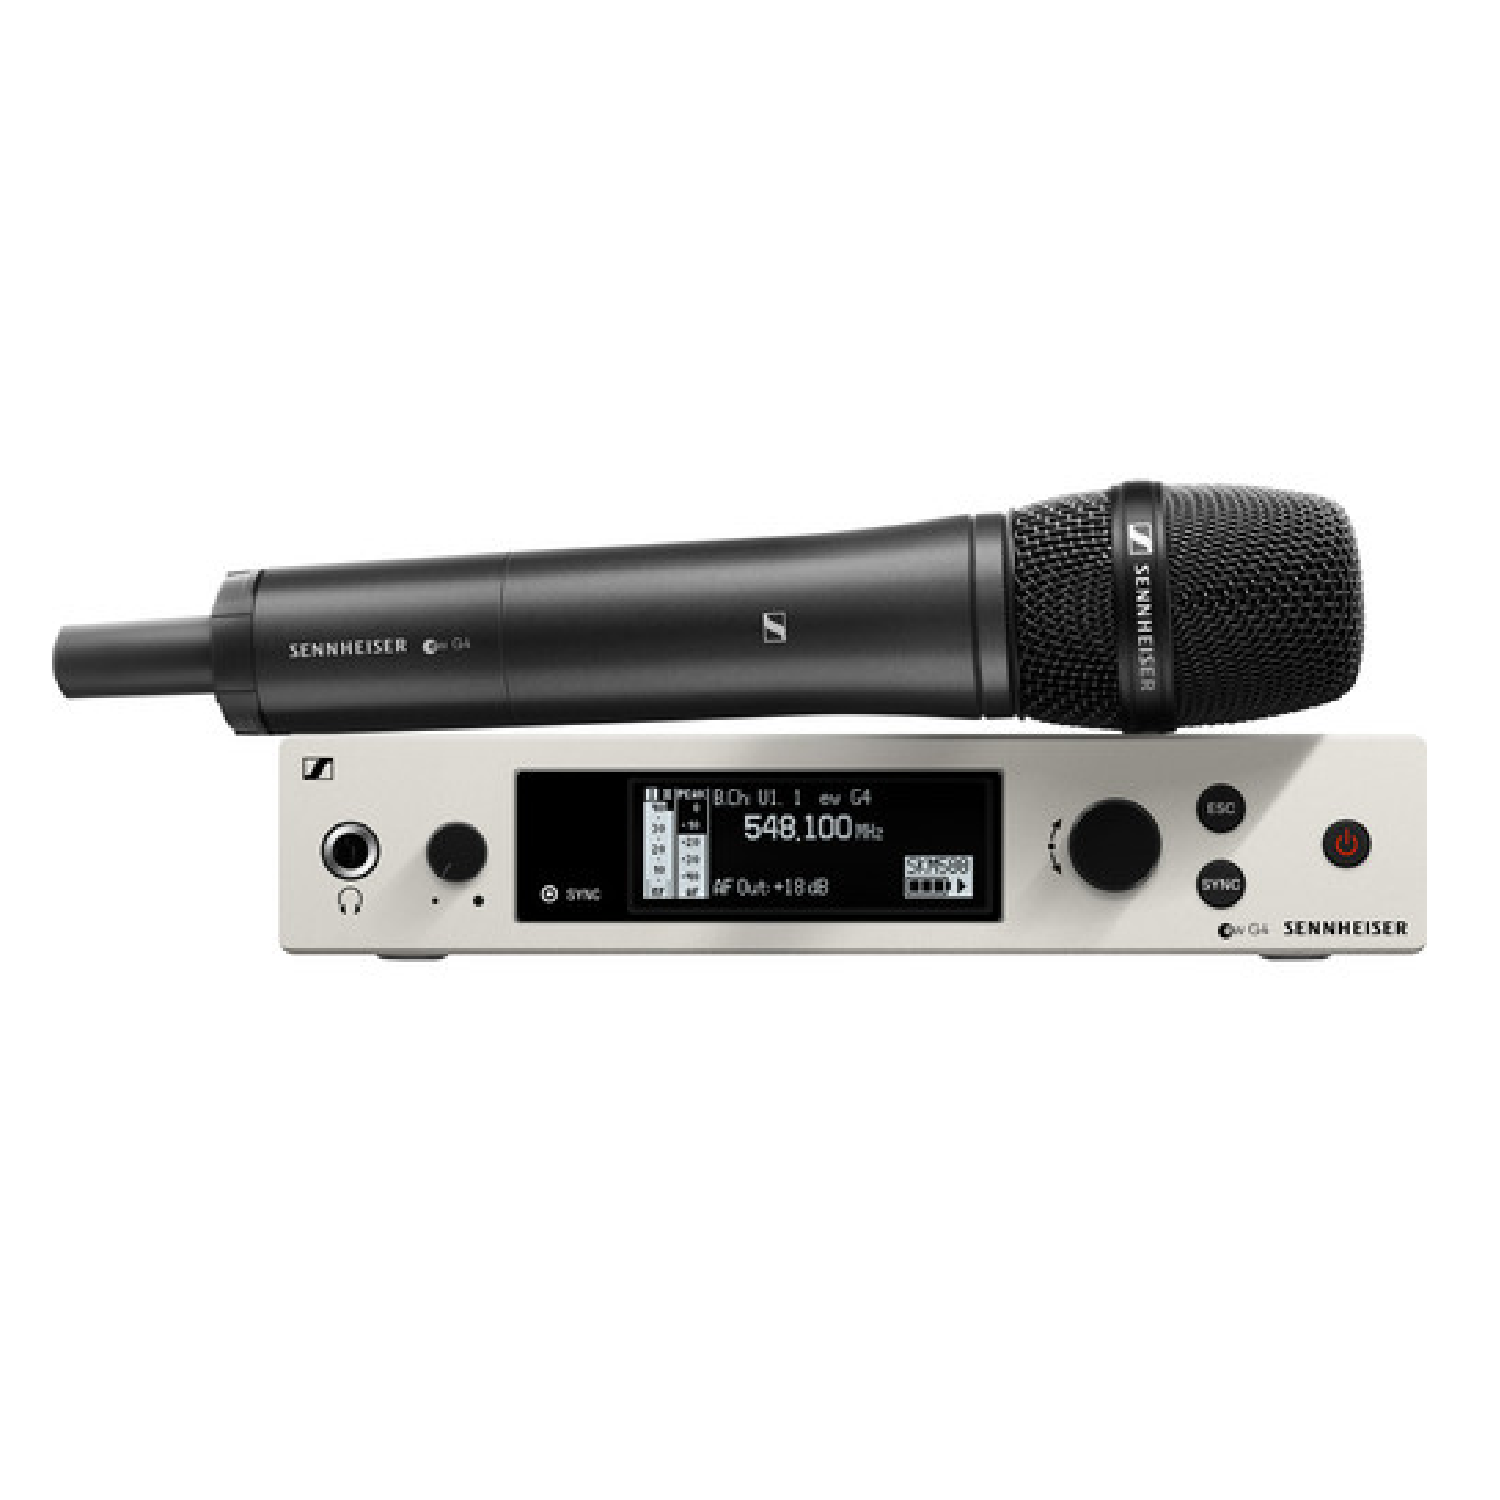 Wireless Handheld Microphone System with MMD 935 Capsule - GBw: 606 - 678 MHz   EW 500 G4 935 GBw sennheiser